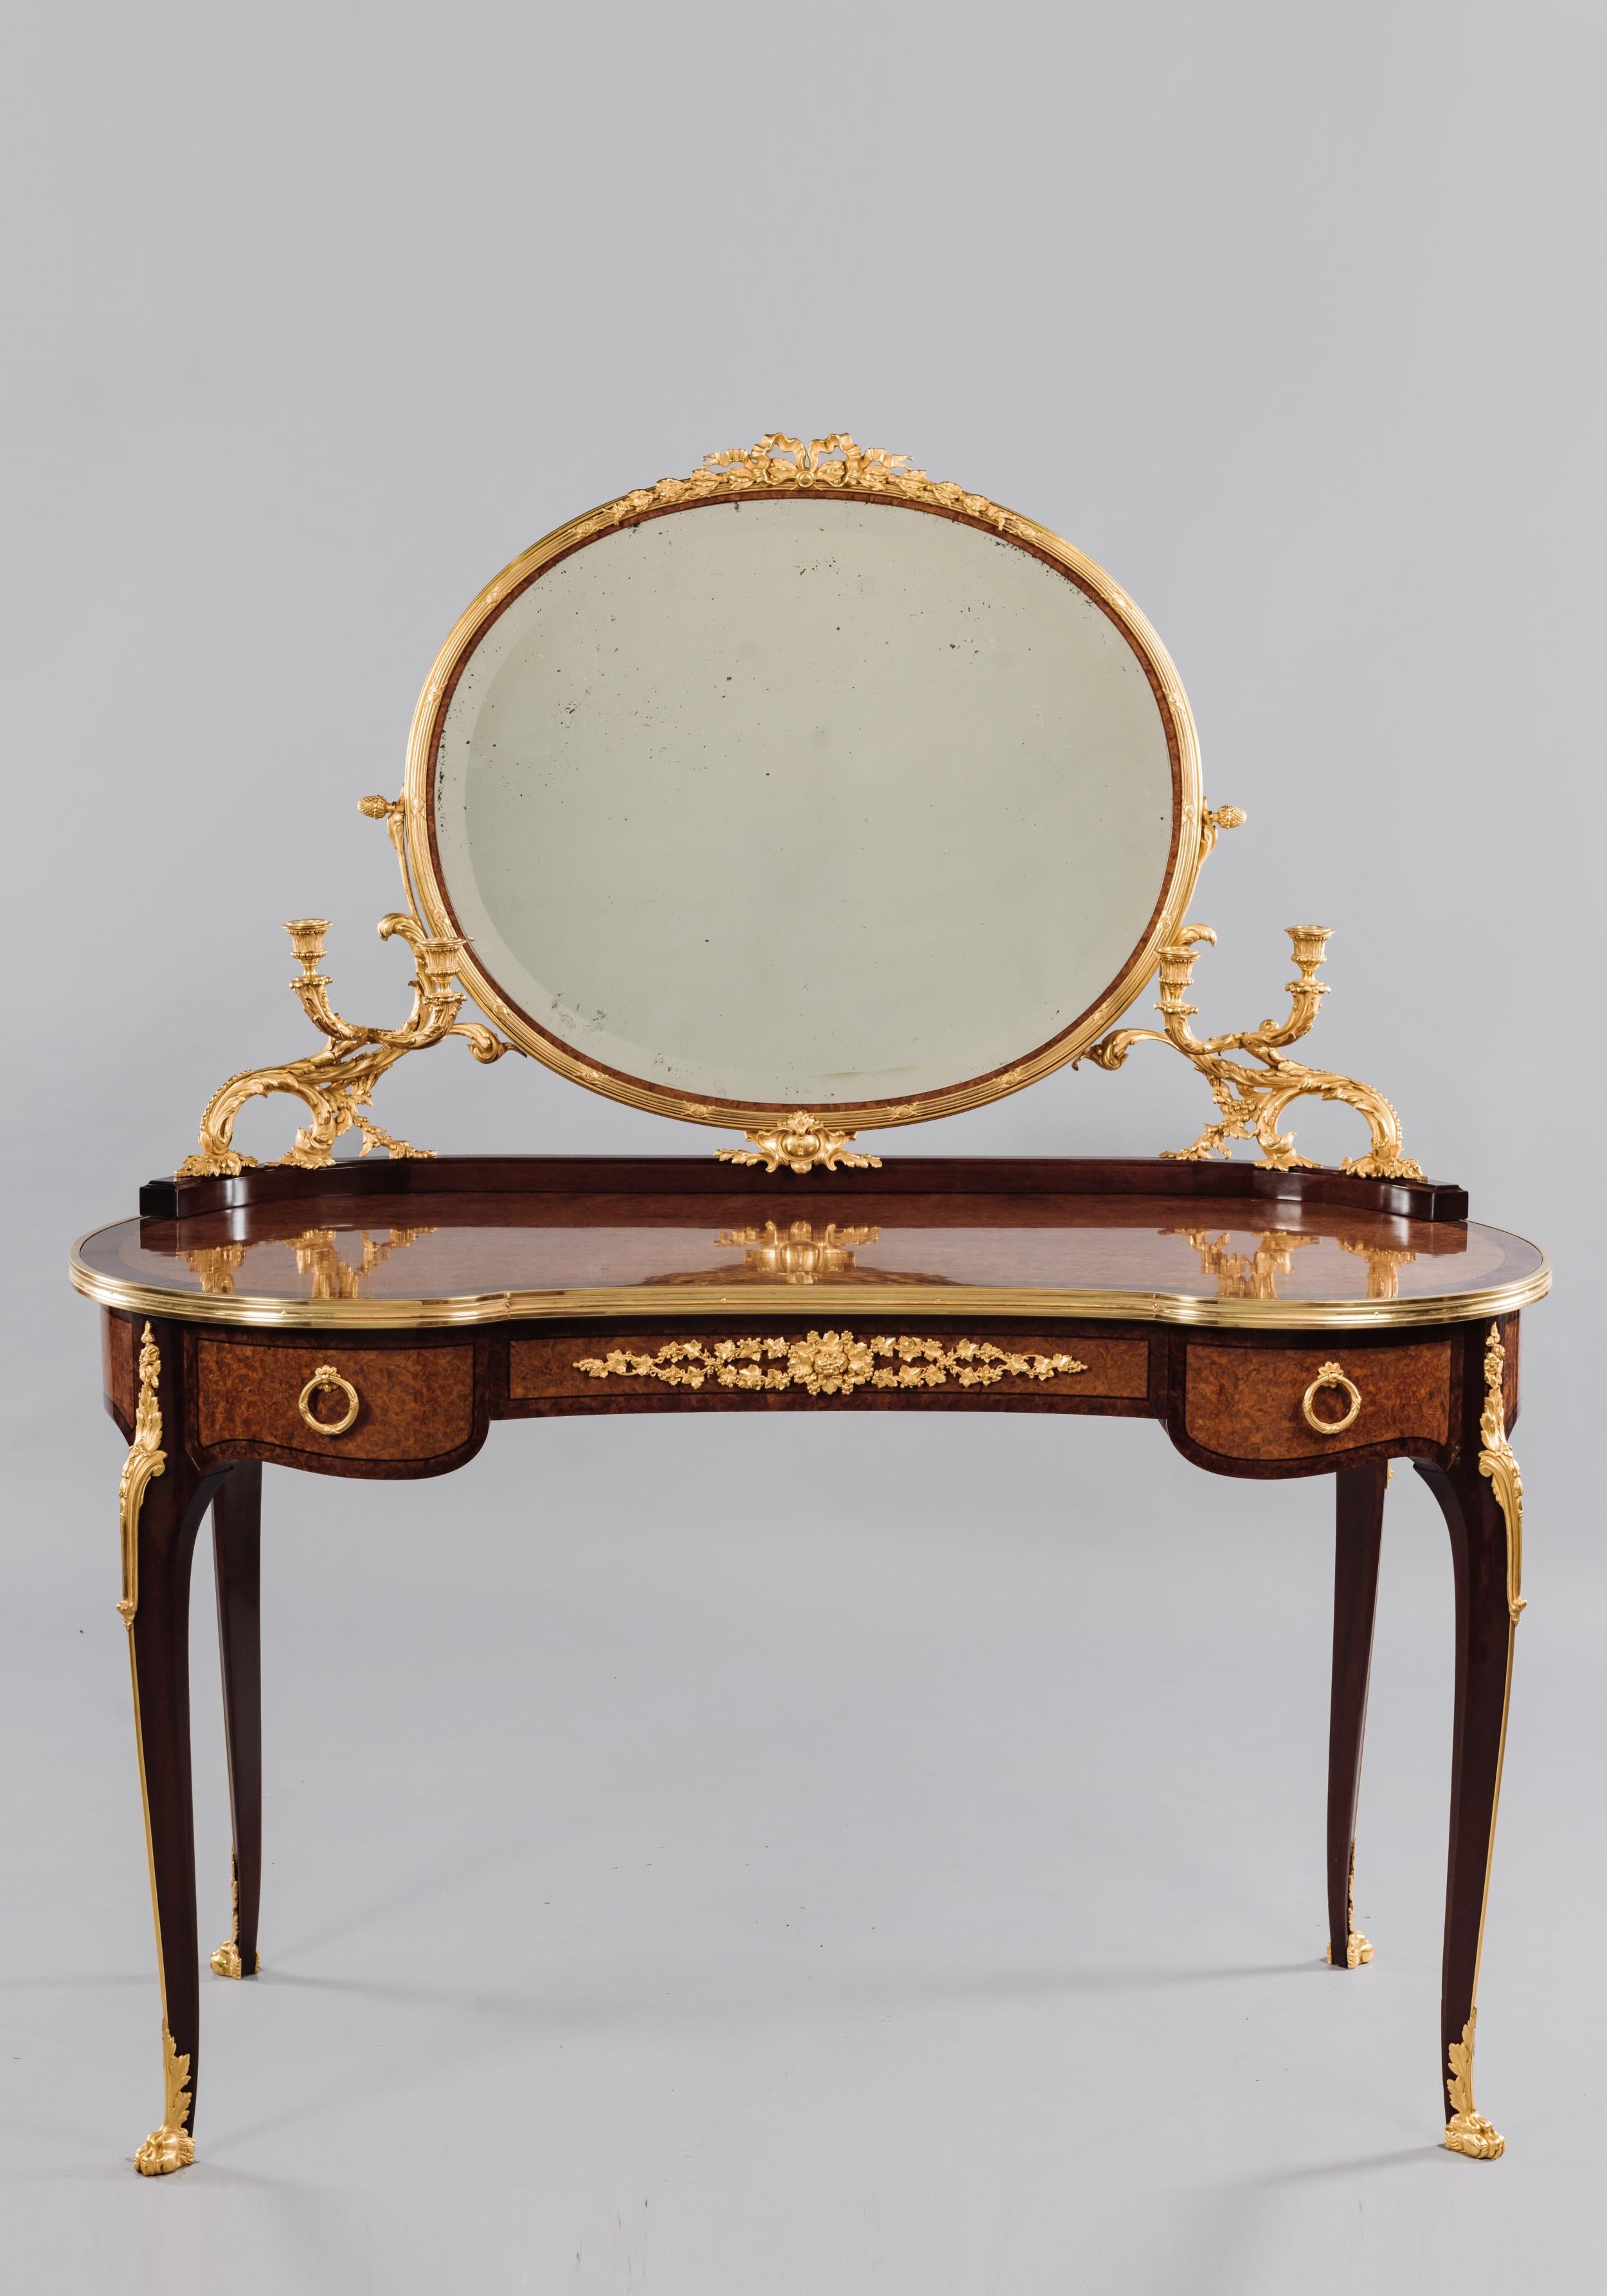 A transitional style gilt-bronze mounted Amboyna dressing table, attributed to François Linke.

French, circa 1900. 

This fine amboyna dressing table has a kidney shaped top with gilt-bronze encadrement and a superstructure supporting an oval